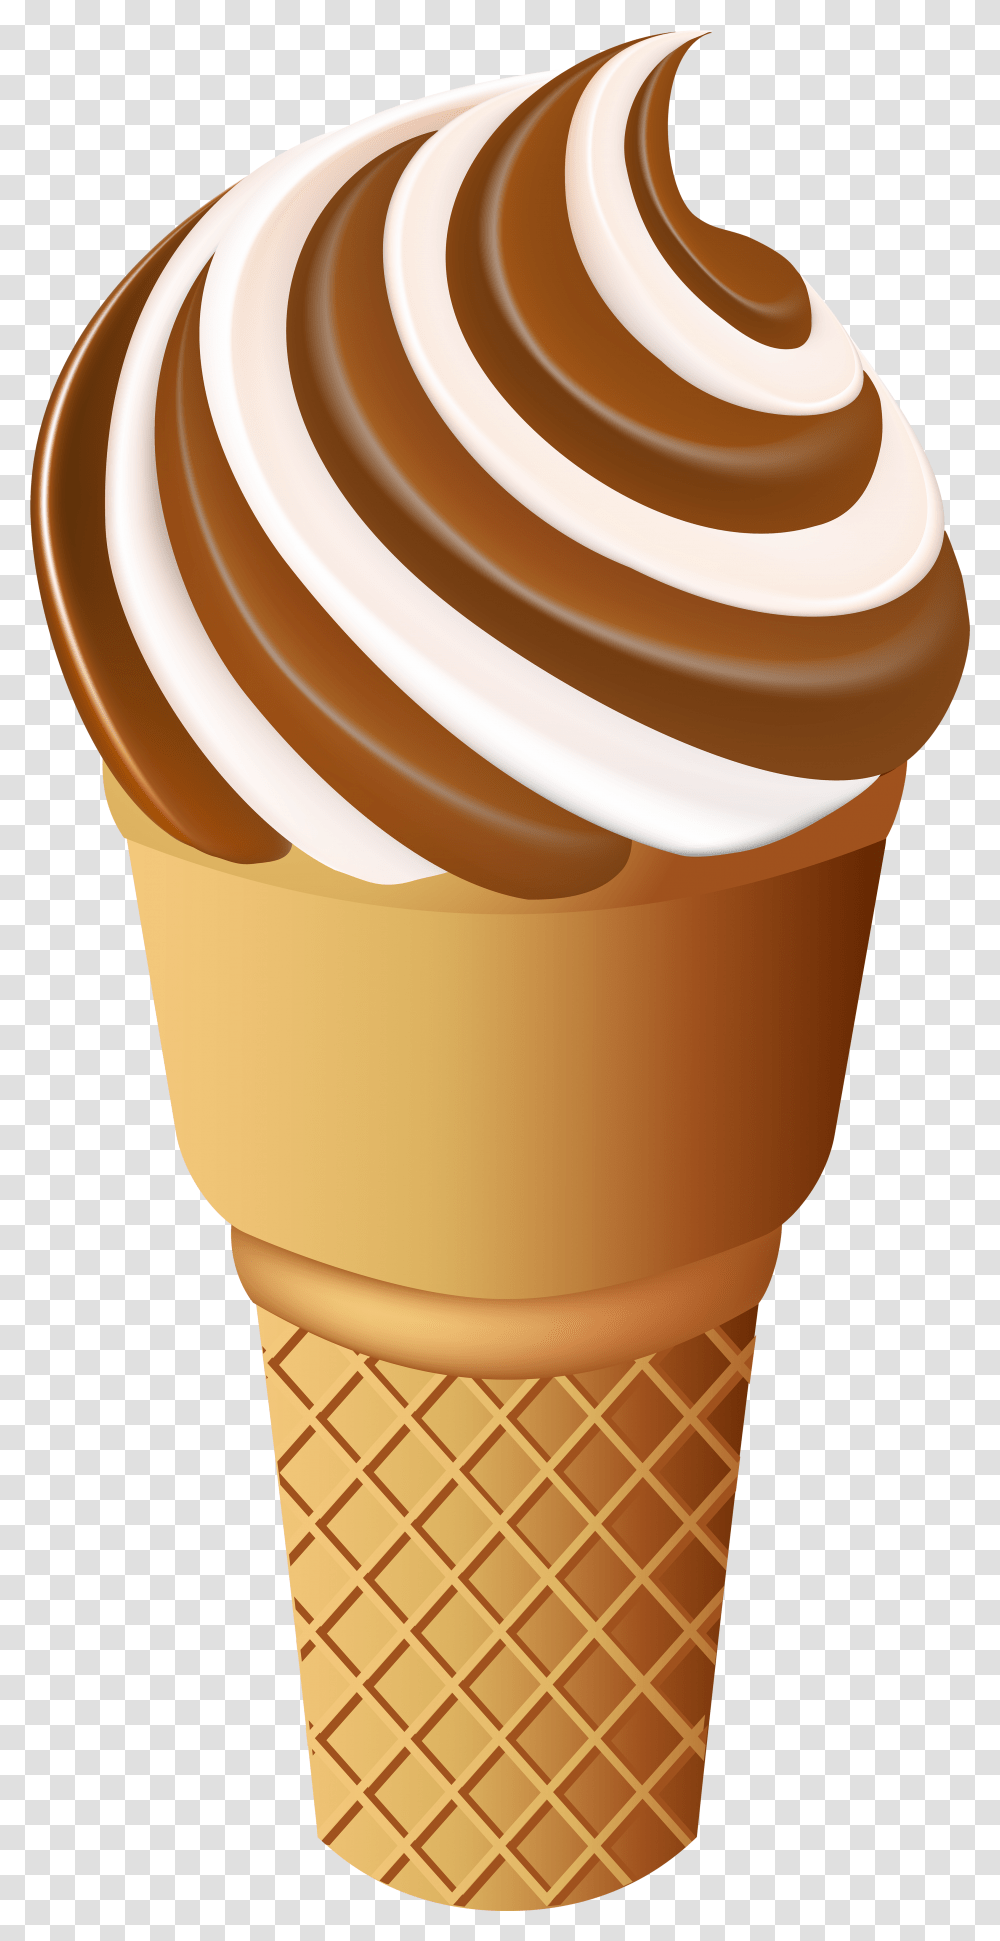 Download Ice Cream Image For Free Ice Cream Clipart, Dessert, Food, Creme, Sweets Transparent Png